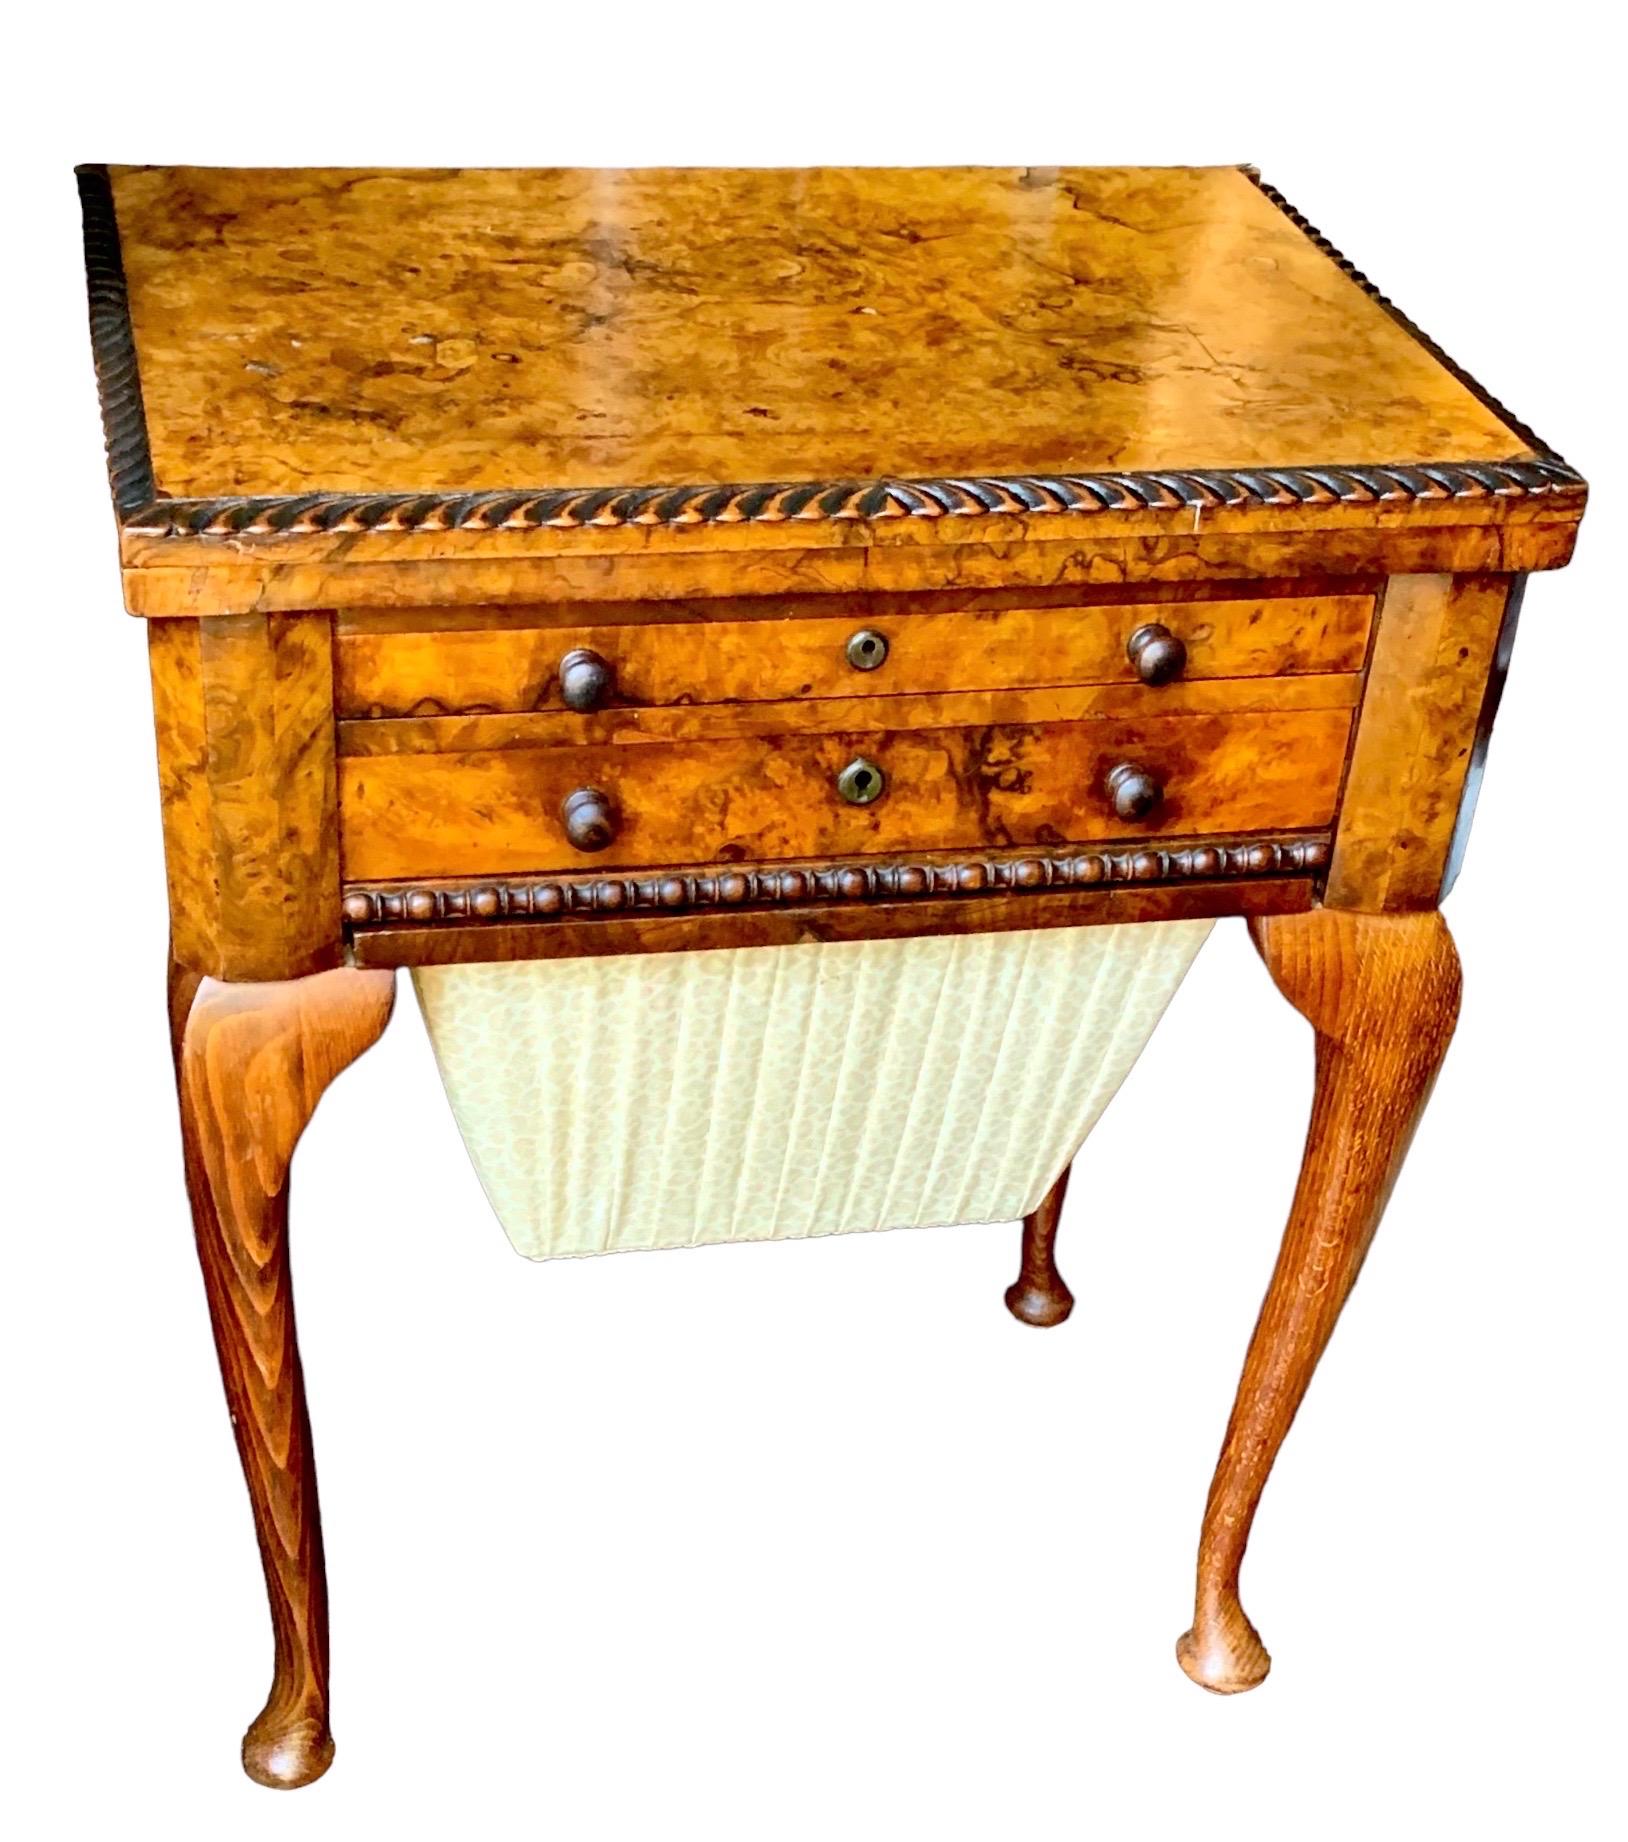 Hand-Carved English Queen Anne Carved Walnut Work/Games Table, 19th c.